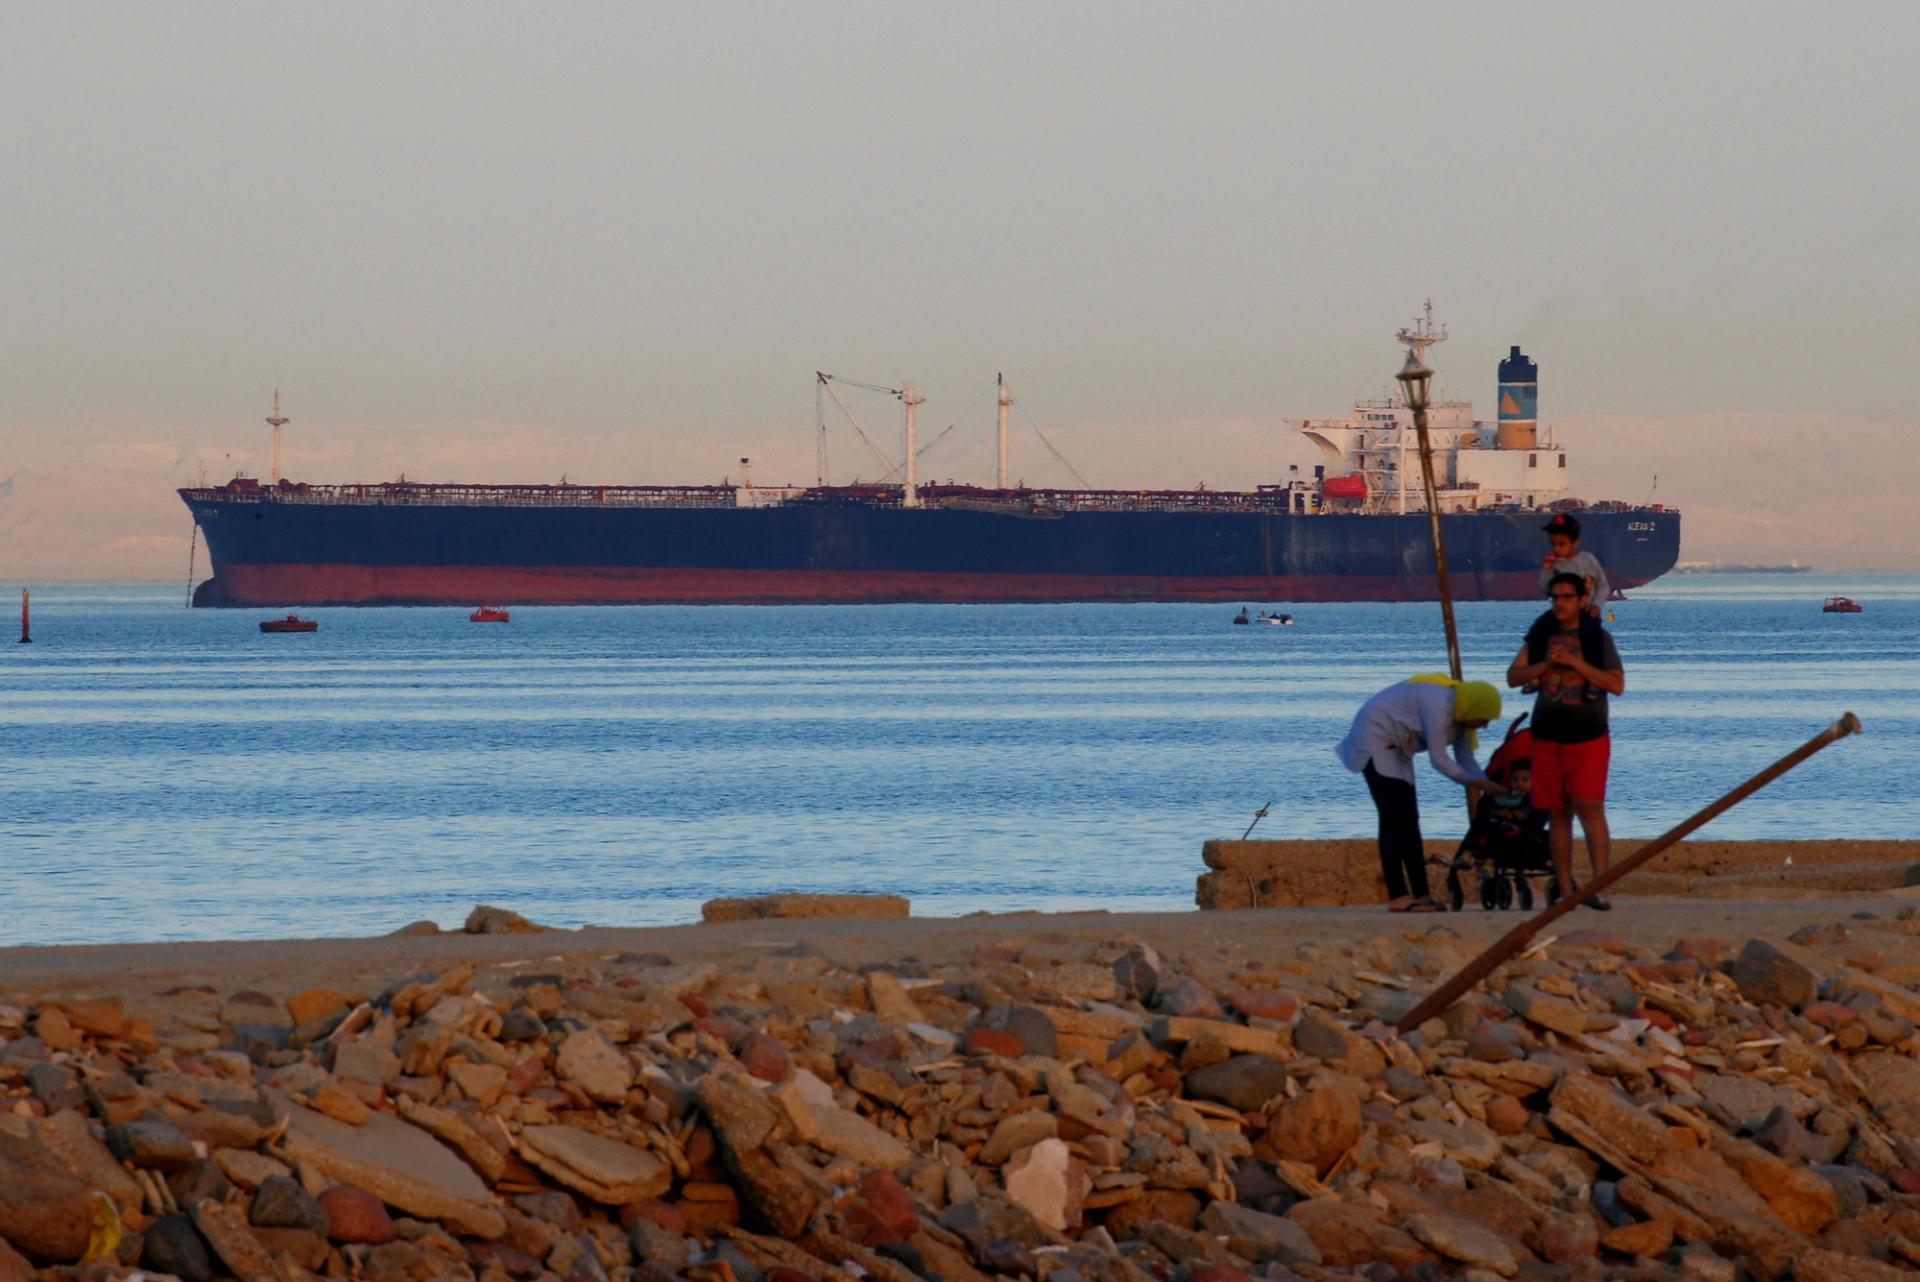 FILE PHOTO: People walk on the beach as a container ship crosses the Gulf of Suez towards the Red Sea before entering the Suez Canal, in El Ain El Sokhna in Suez, east of Cairo, Egypt April 24, 2017. REUTERS/Amr Abdallah Dalsh/File Photo